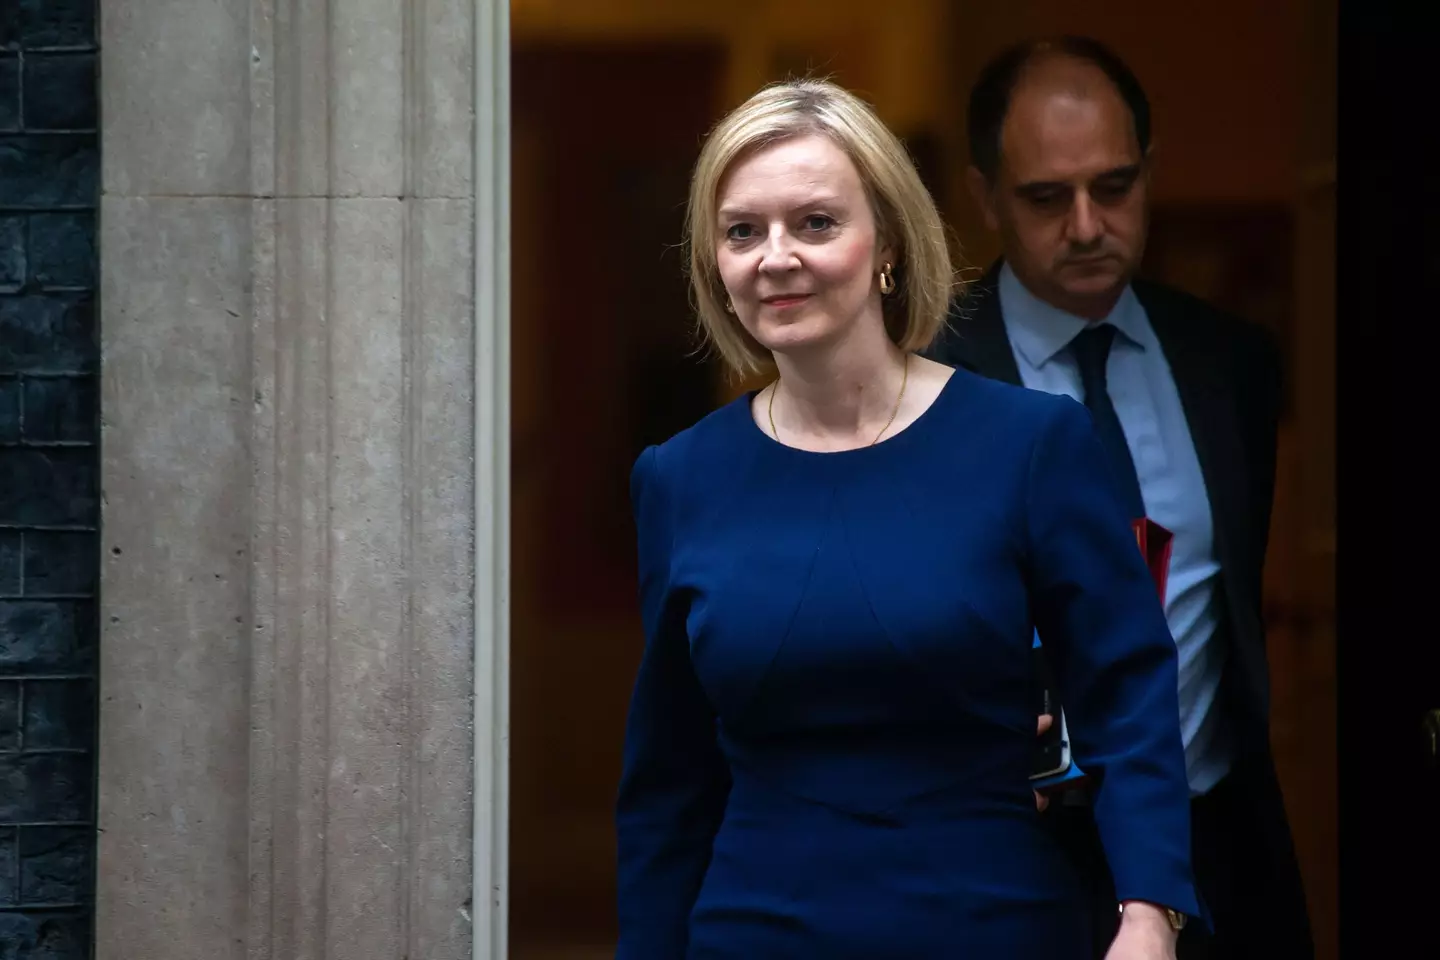 People don't have trust in Liz Truss' government capabilities.